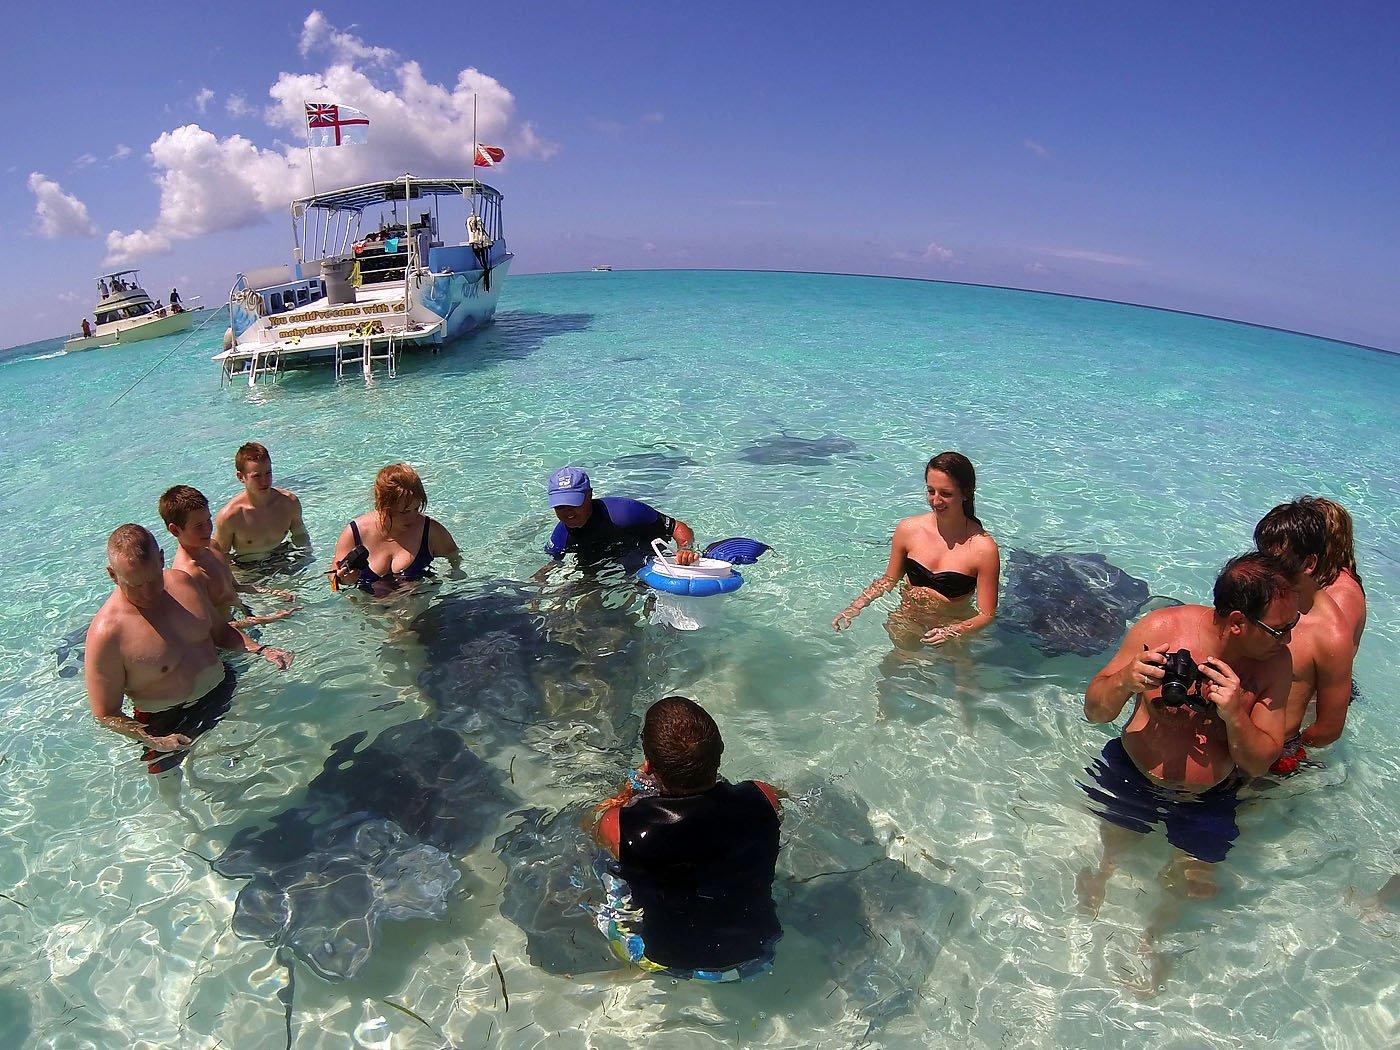 Moby dick tours cayman